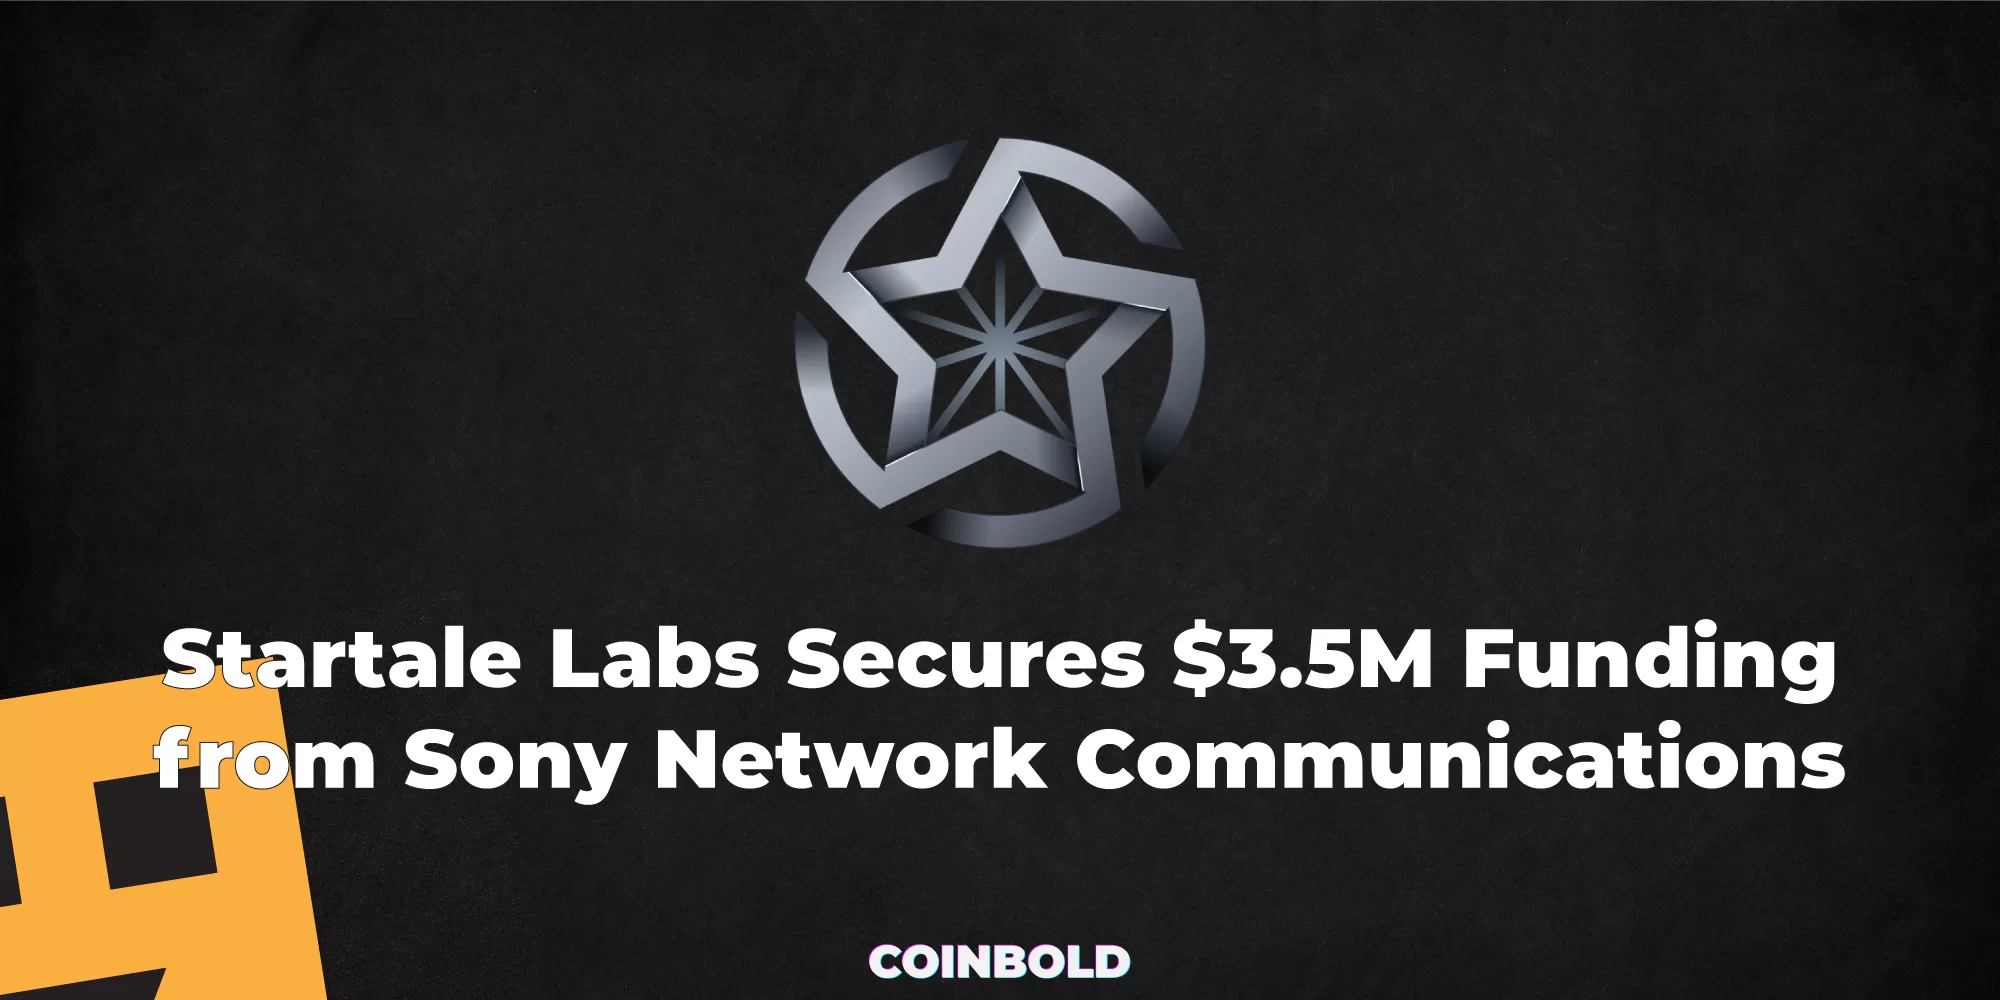 Startale Labs Secures $3.5M Funding from Sony Network Communications